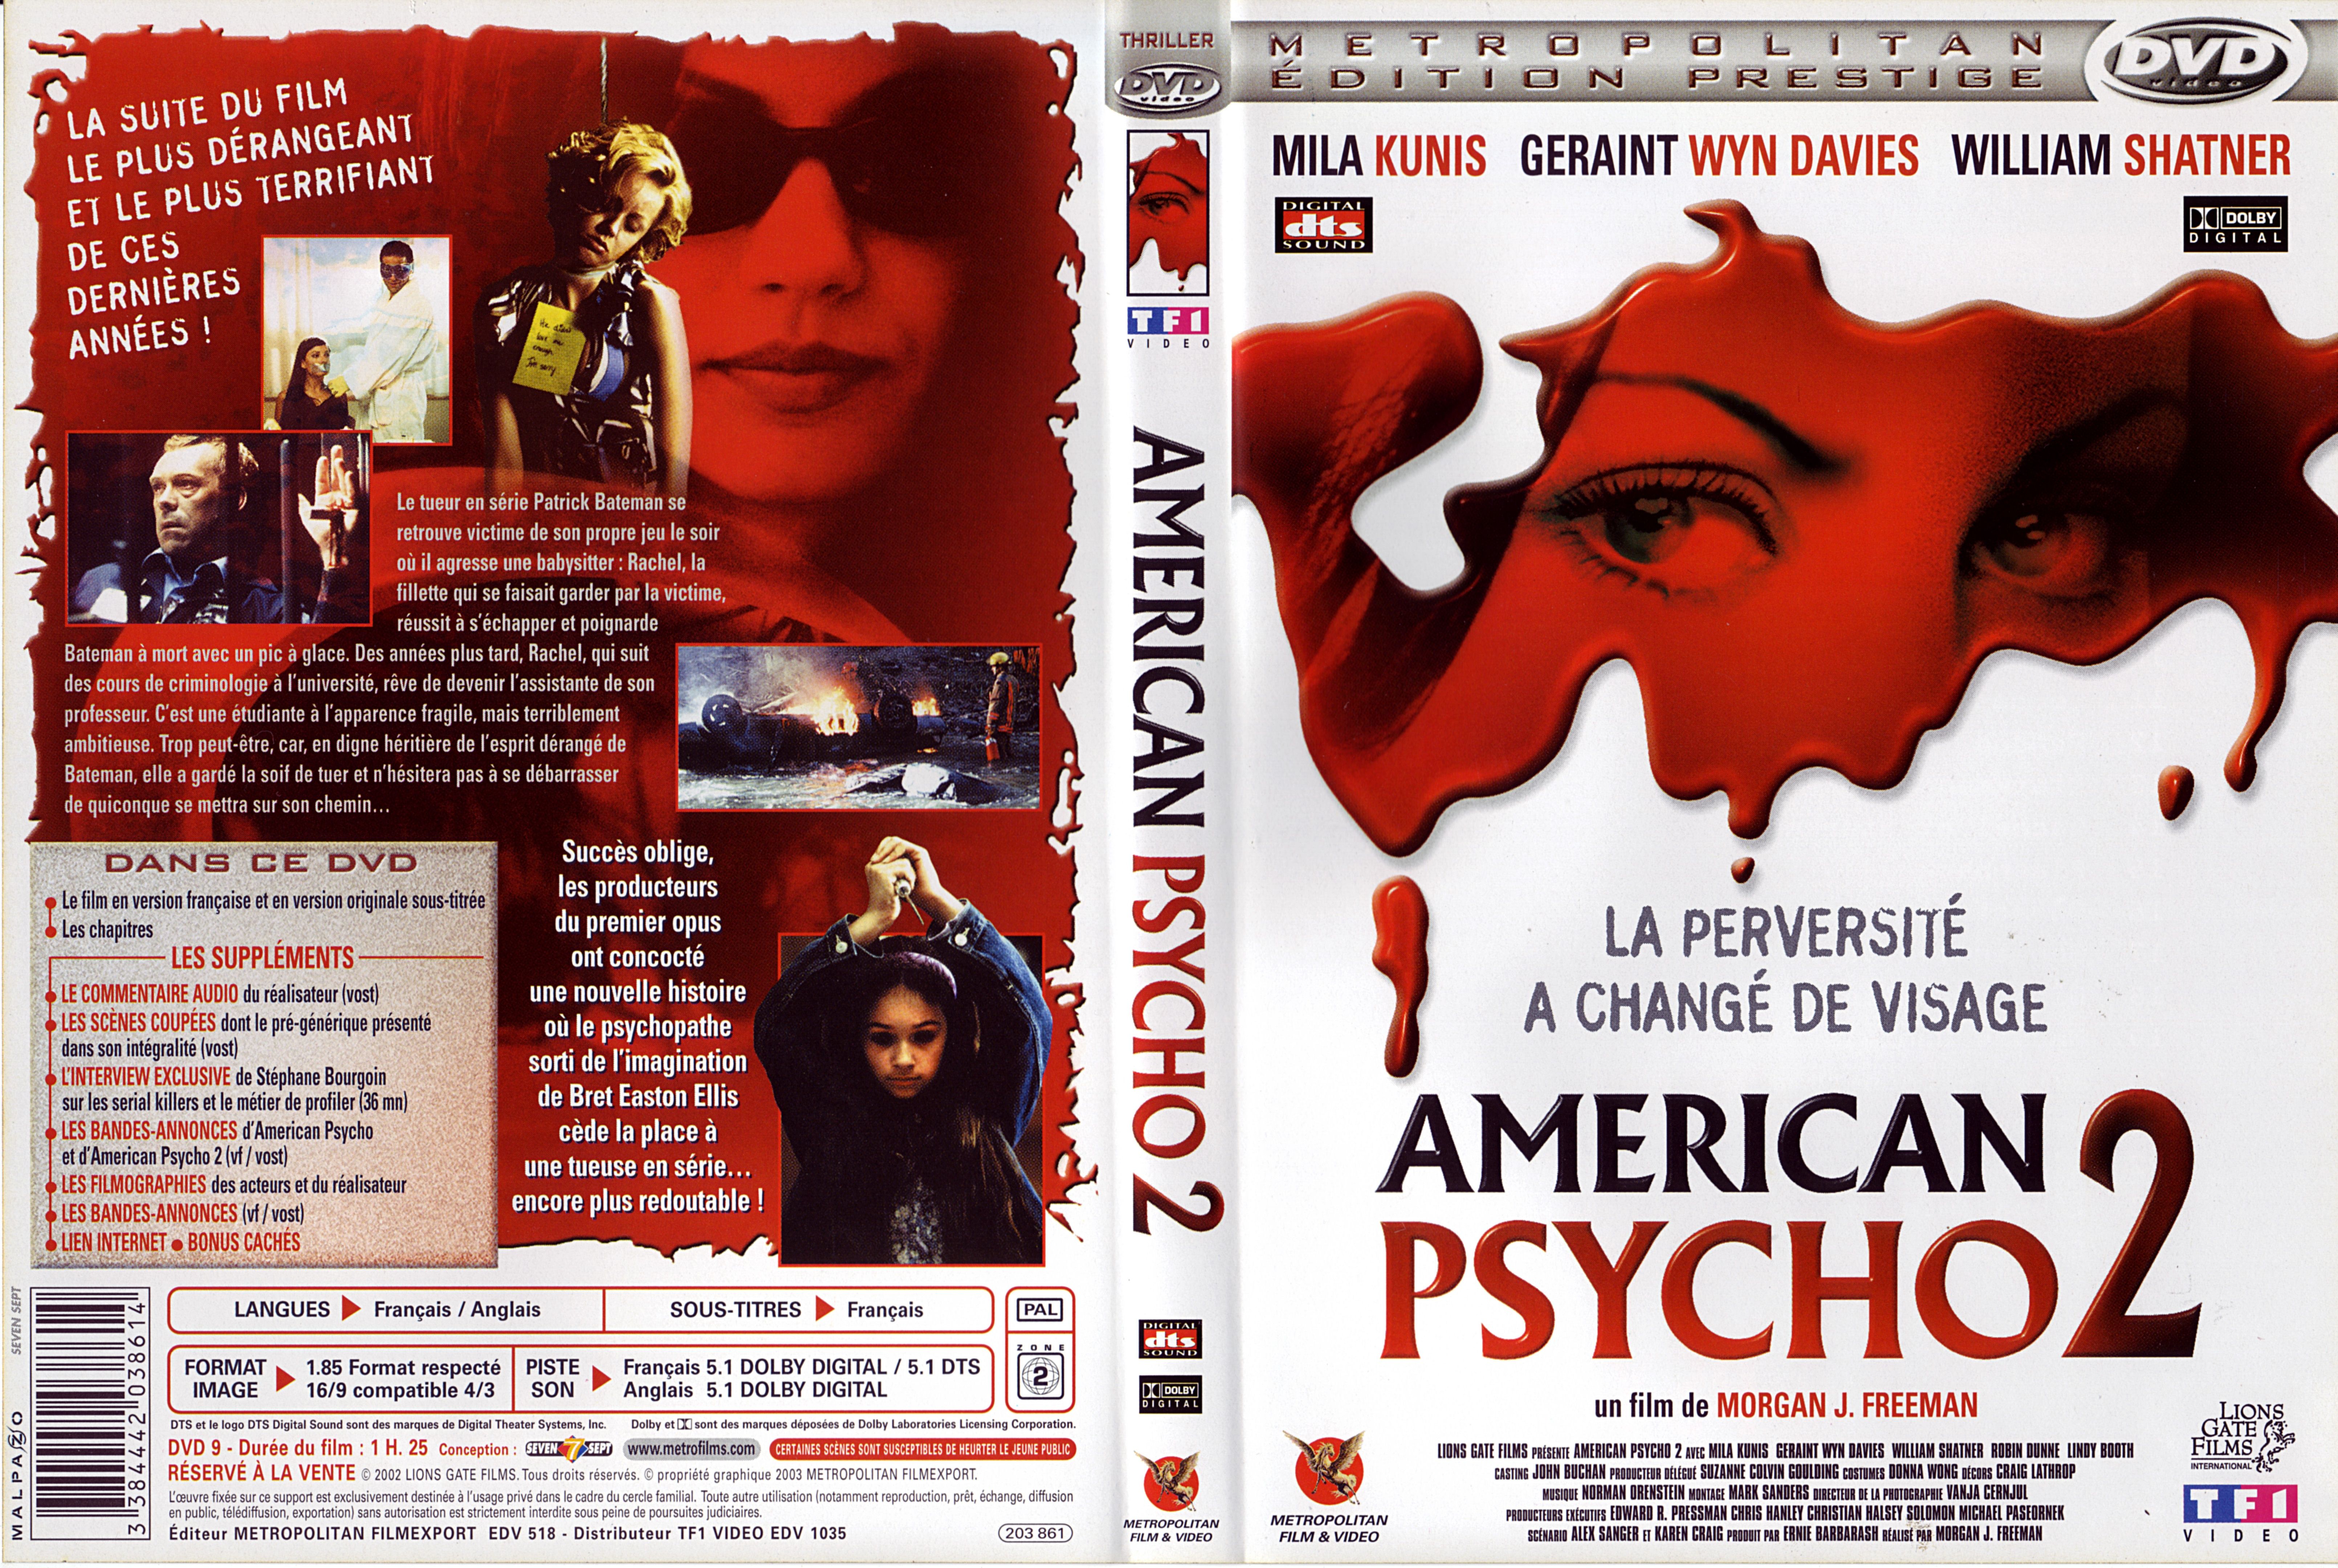 Jaquette DVD American psycho 2